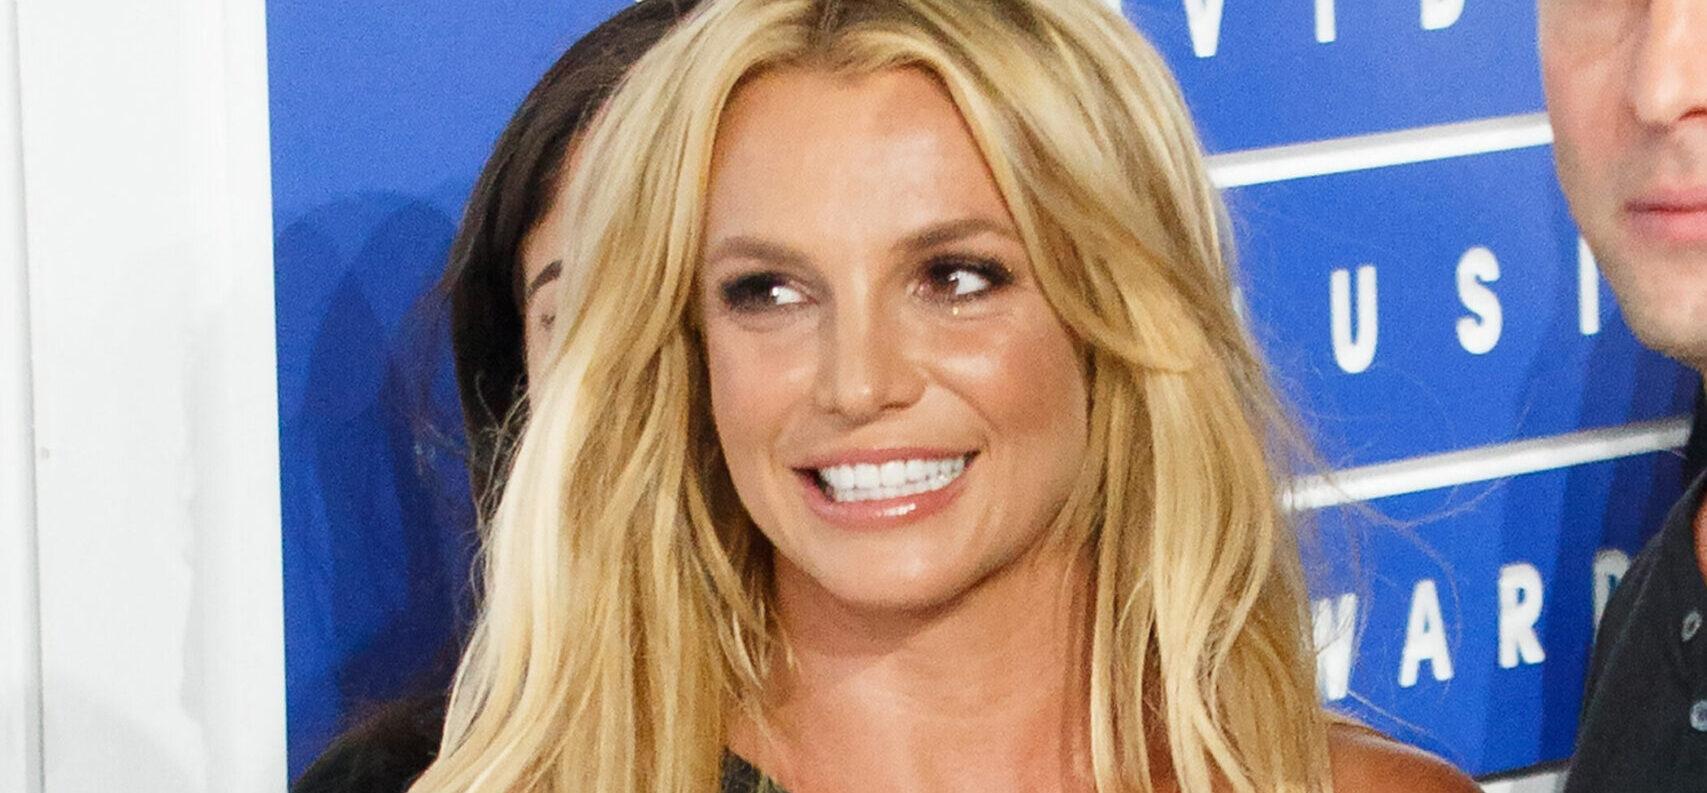 Britney Spears Fans Debate Her Teeth After She Leaves Instagram Comments On